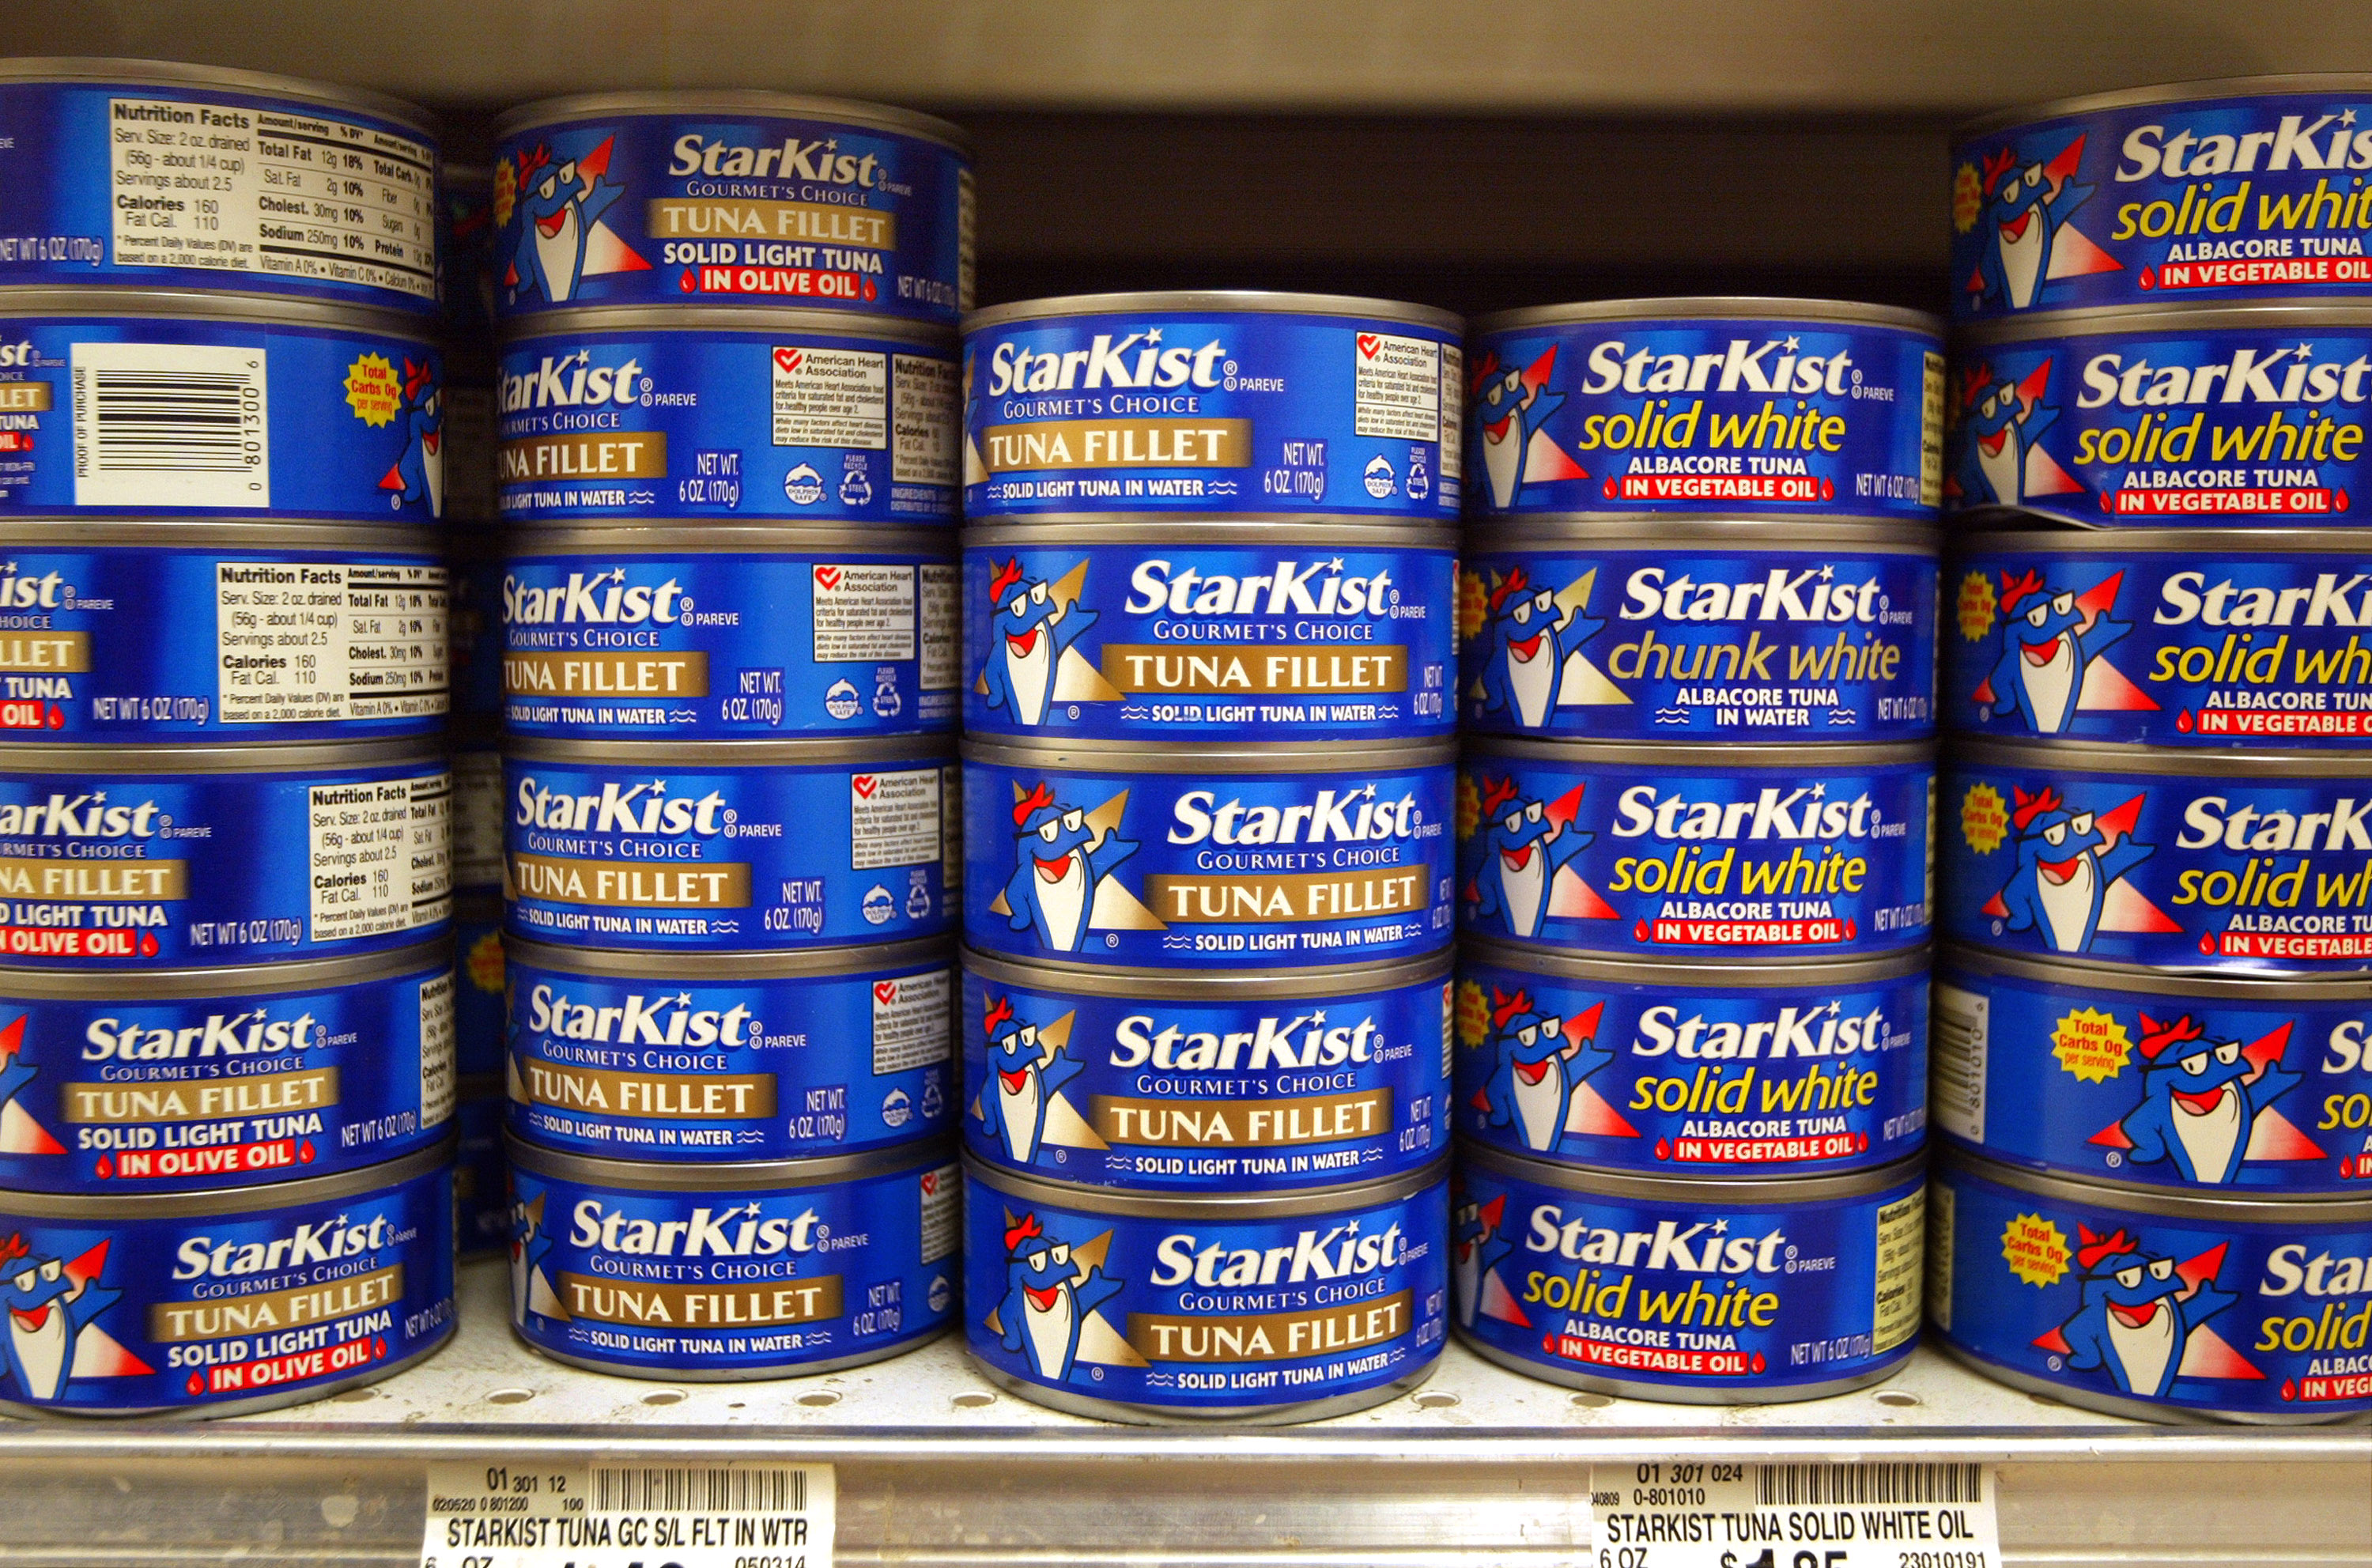 Cans of tuna are seen on a shelf August 12, 2004 in a grocery store in Des Plaines, Illinois. (Tim Boyle&mdash;Getty Images)